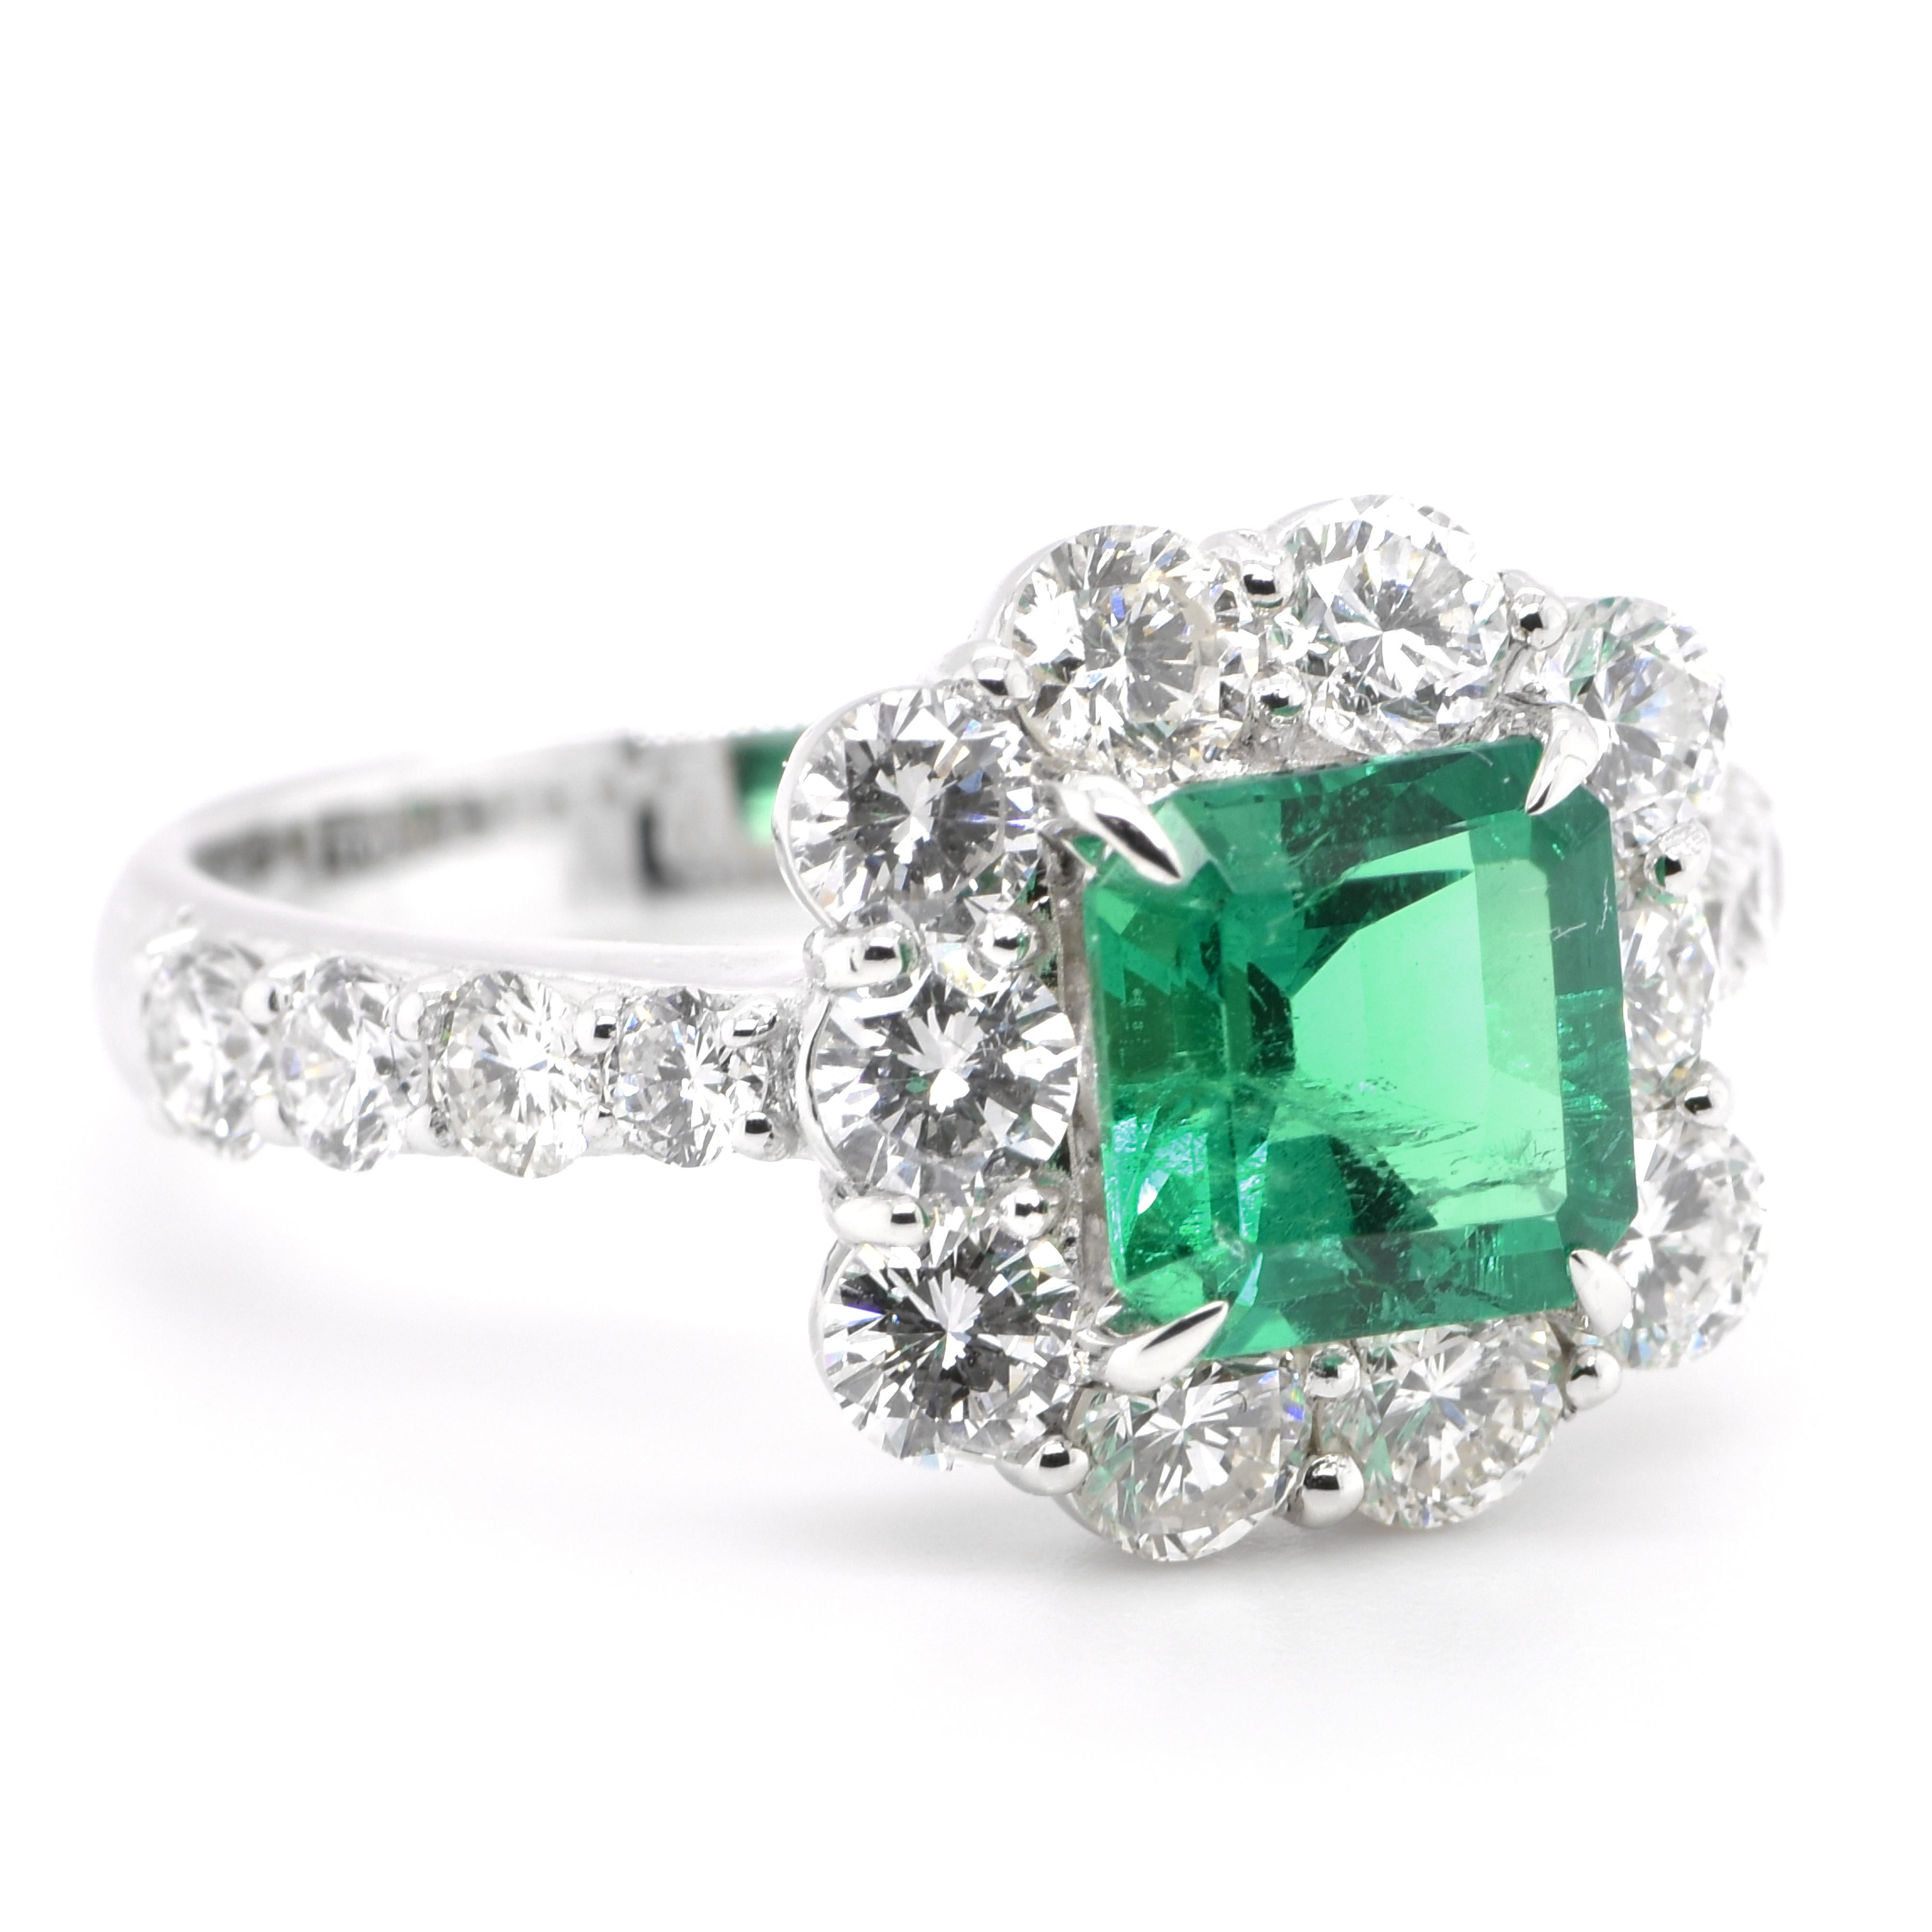 A stunning ring featuring a GRS Certified 1.43 Carat Natural Colombian Emerald and 1.81 Carats of Diamond Accents set in Platinum. People have admired emerald’s green for thousands of years. Emeralds have always been associated with the lushest